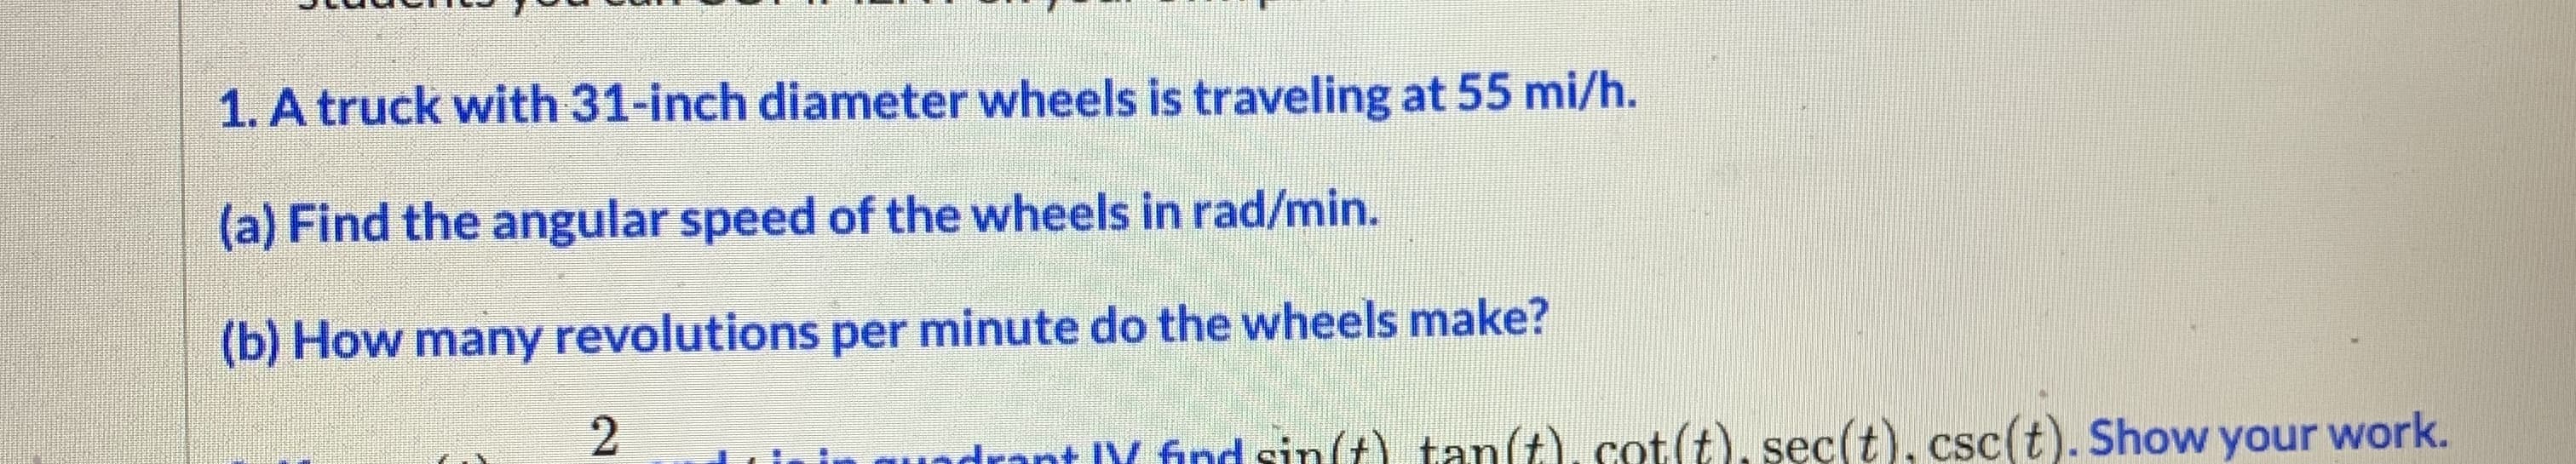 1. A truck with 31-inch diameter wheels is traveling at 55 mi/h.
(a) Find the angular speed of the wheels in rad/min.
(b) How many revolutions per minute do the wheels make?
odrant V ind sin(t) tan(t), cot(t), sec(t), csc(t). Show your work.
